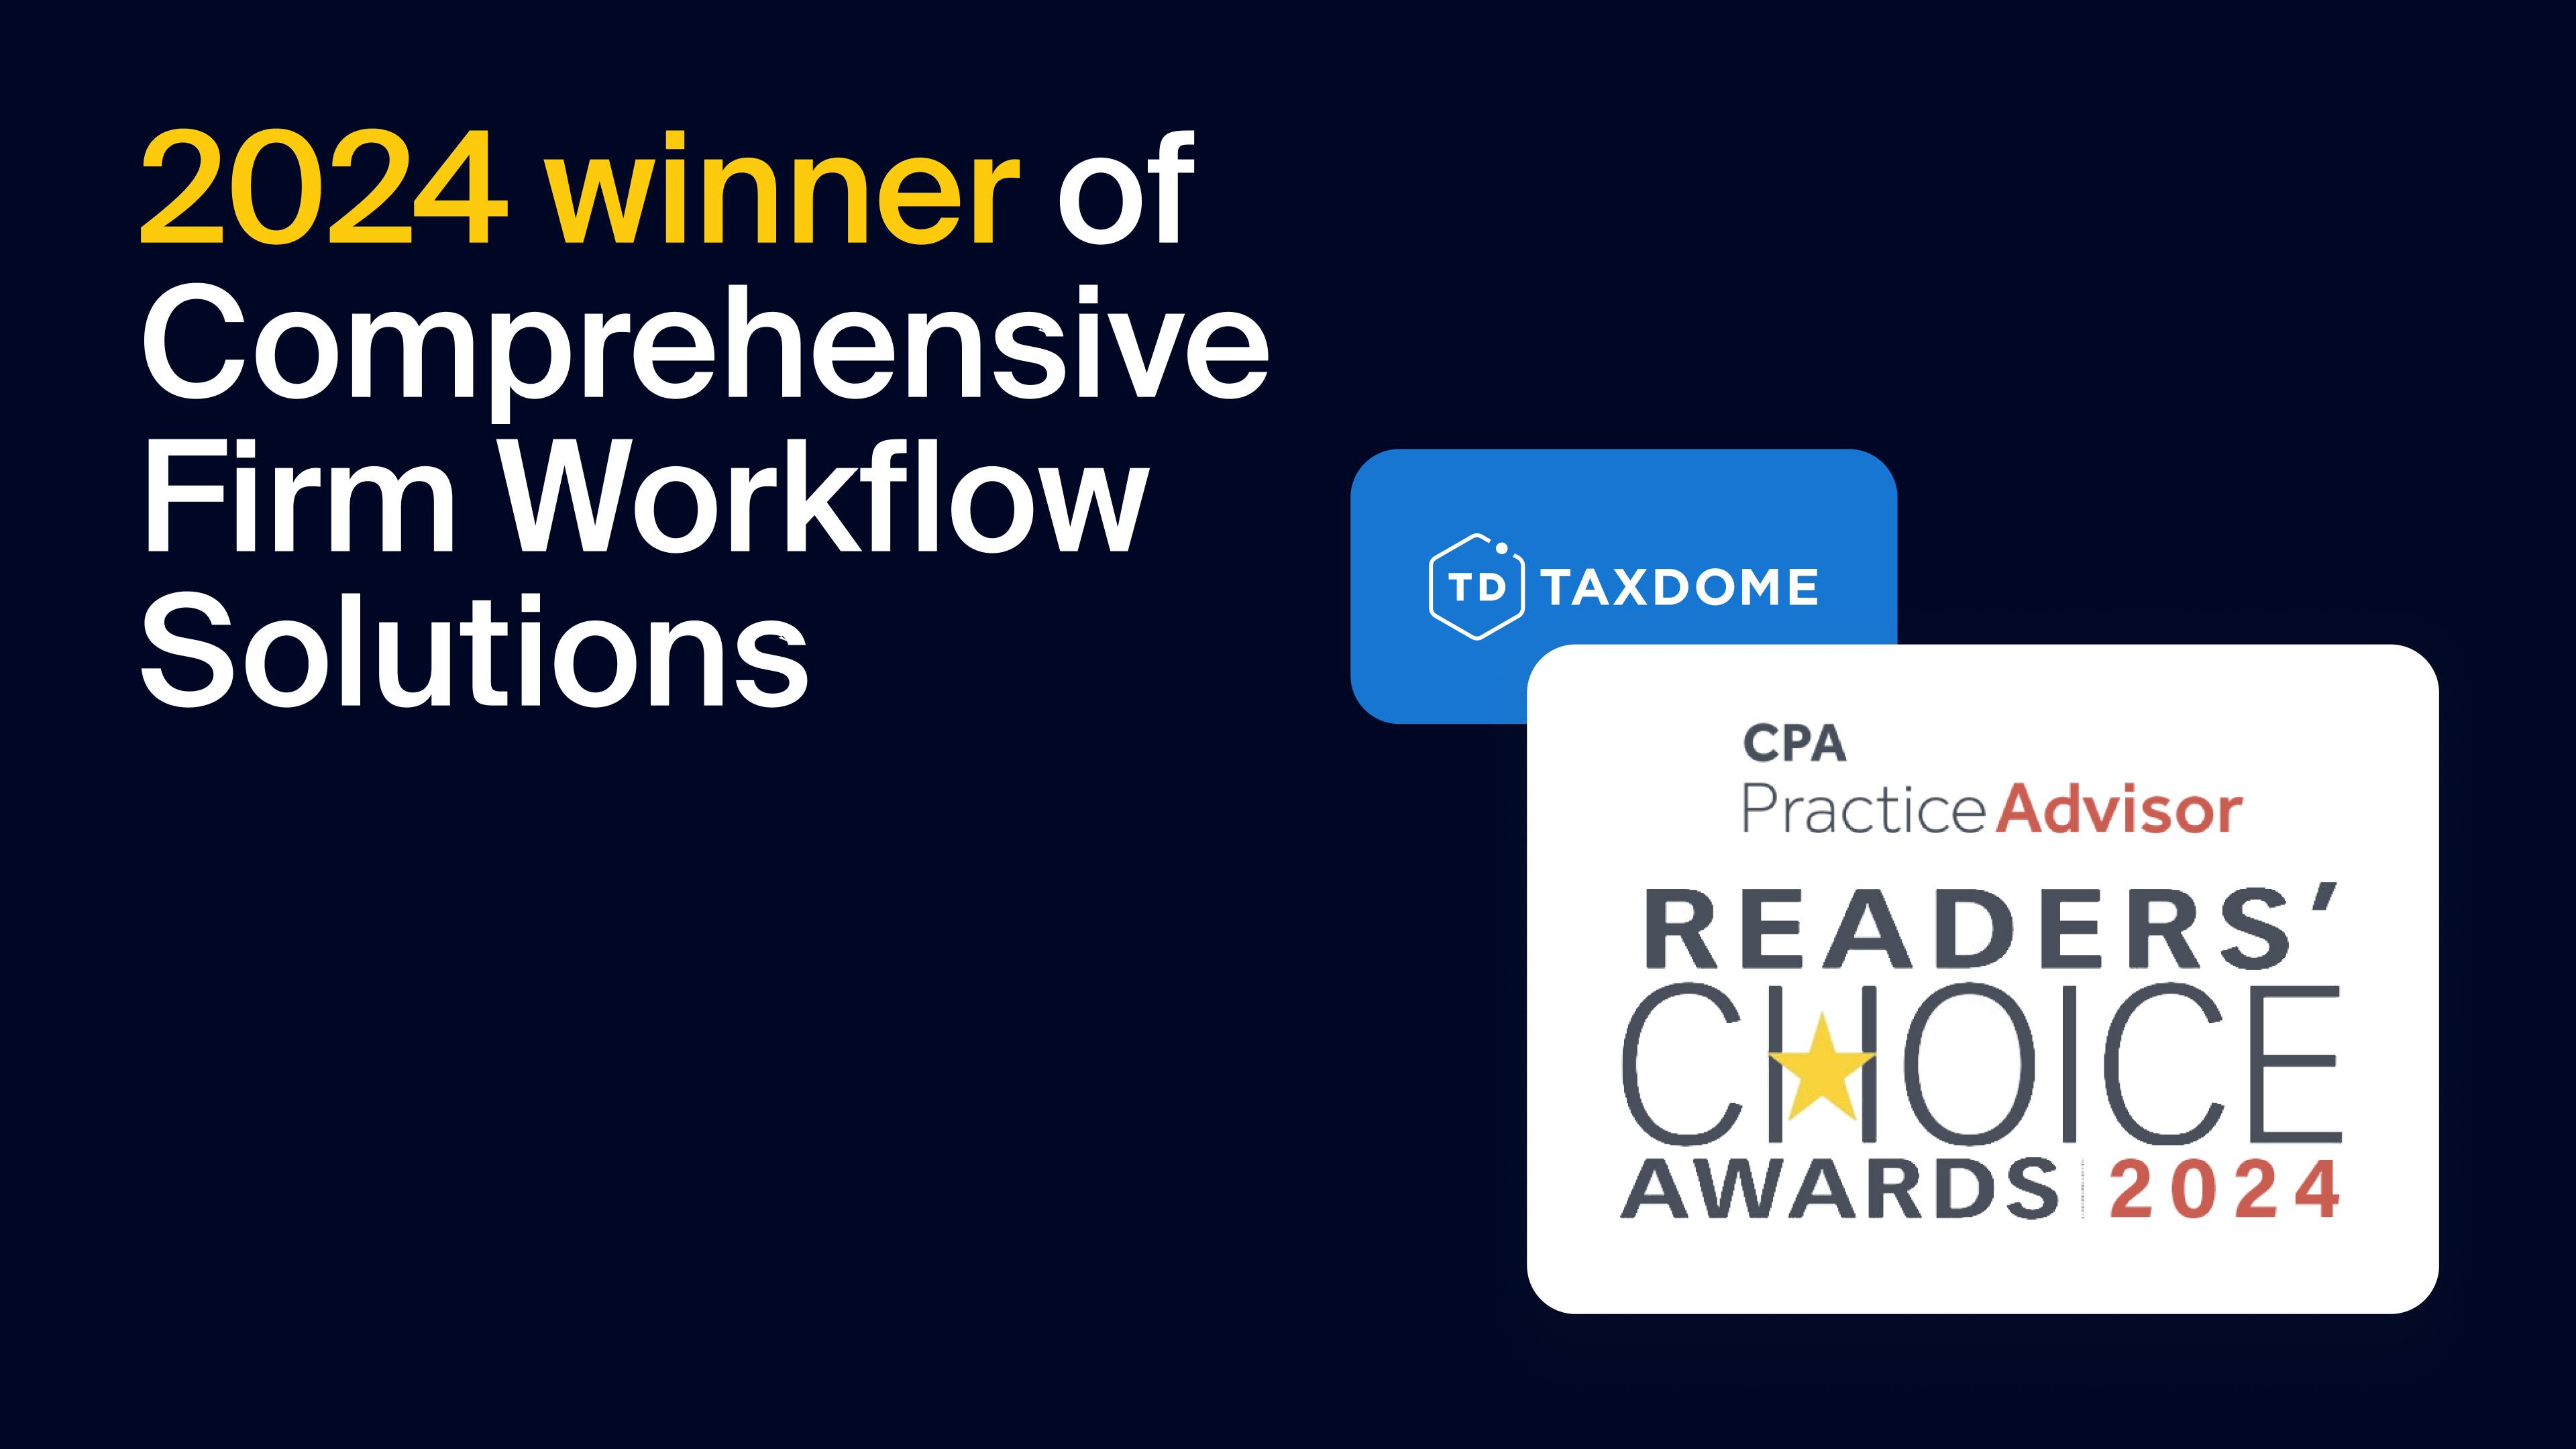 TaxDome wins Comprehensive Firm Workflow Solutions - Banner